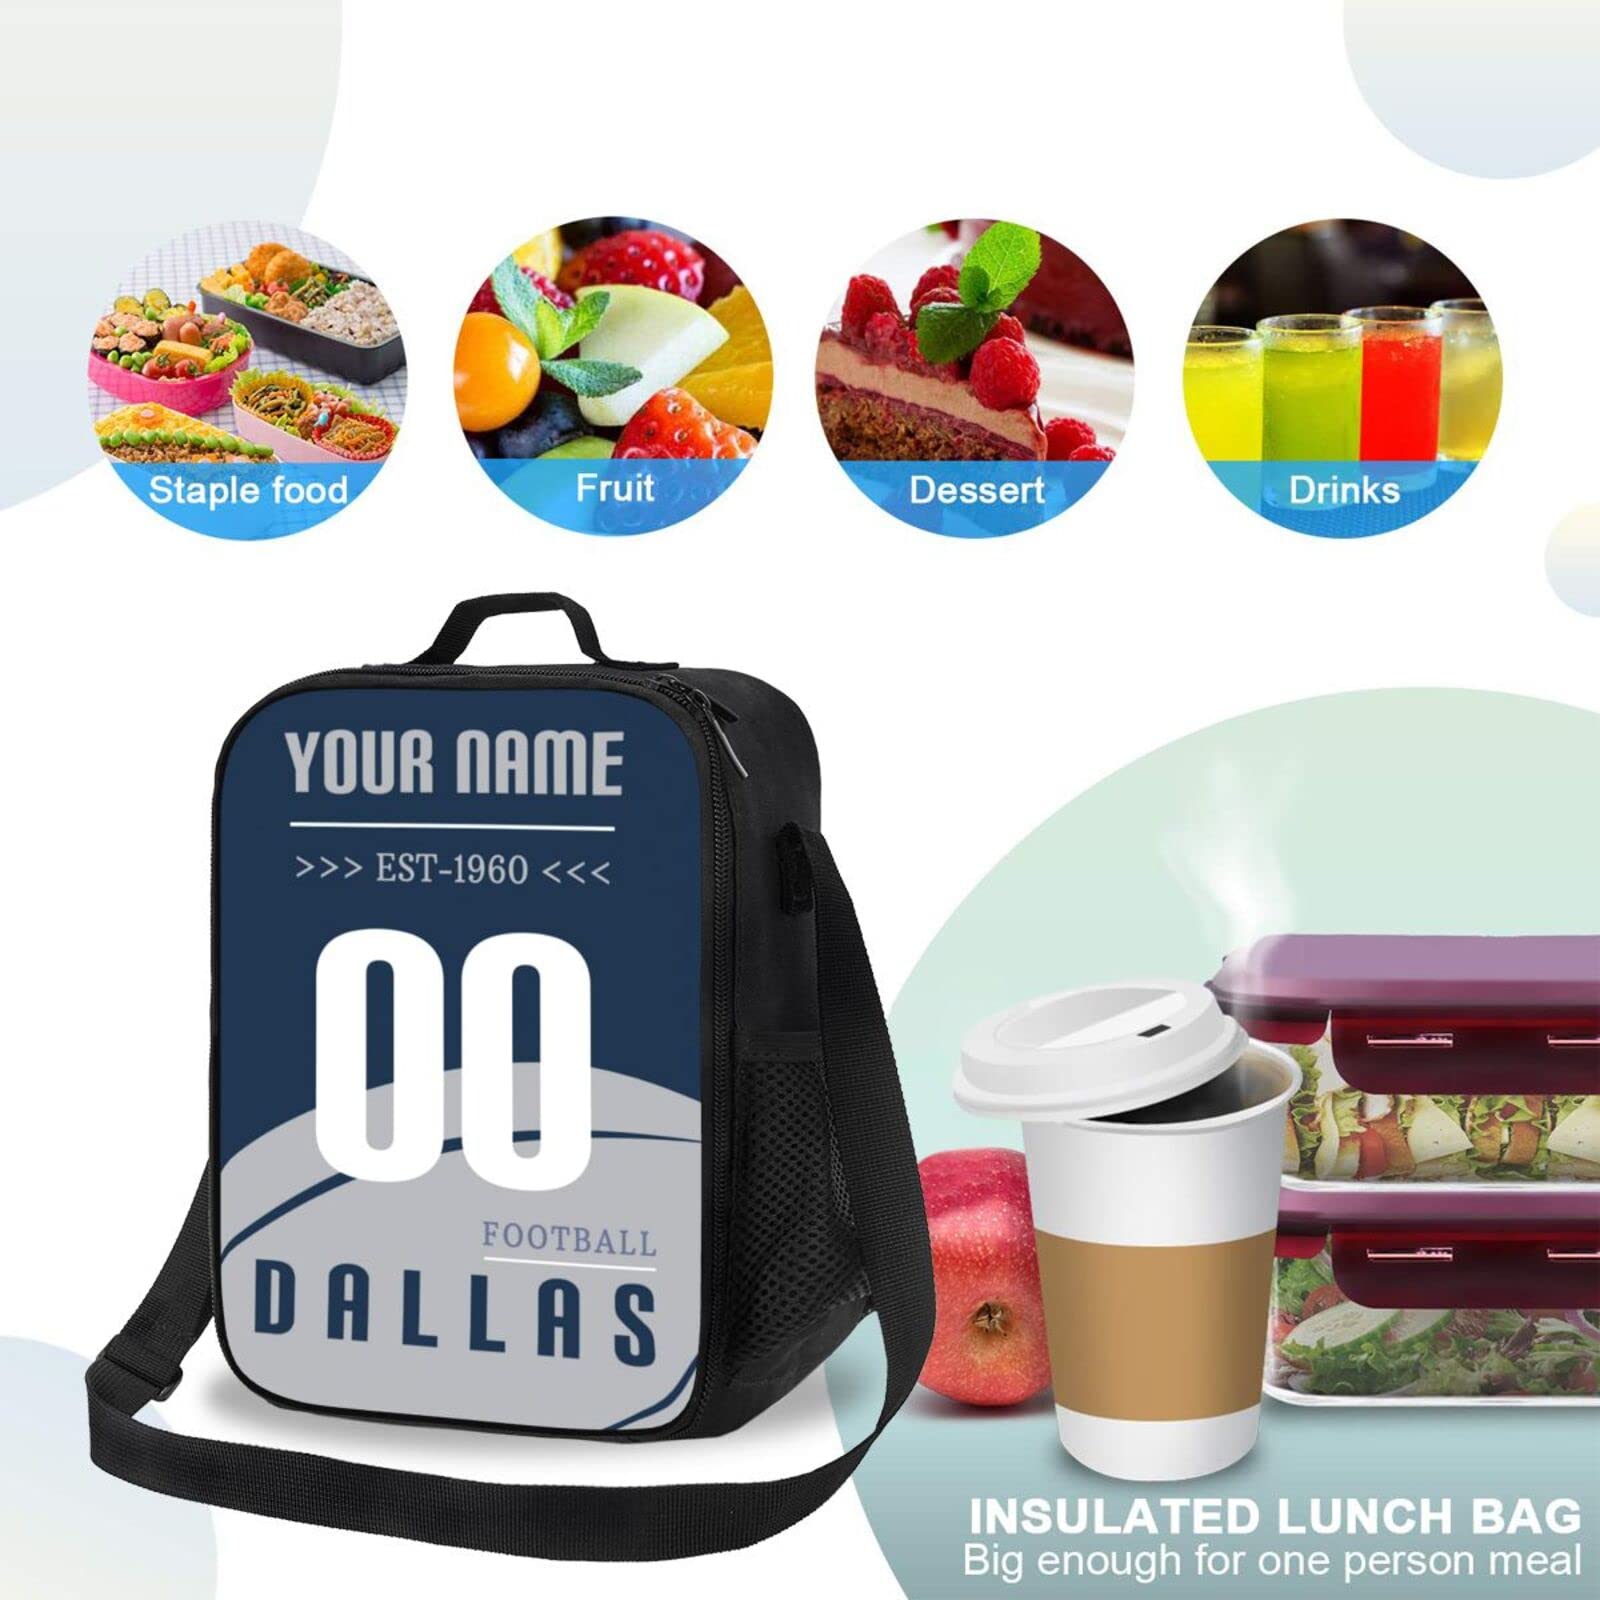 Quzeoxb Custom Dallas Lunch Bag, Personalized Insulated Lunch Box with Adjustable Strap Cooler Bag Gifts for Men Women